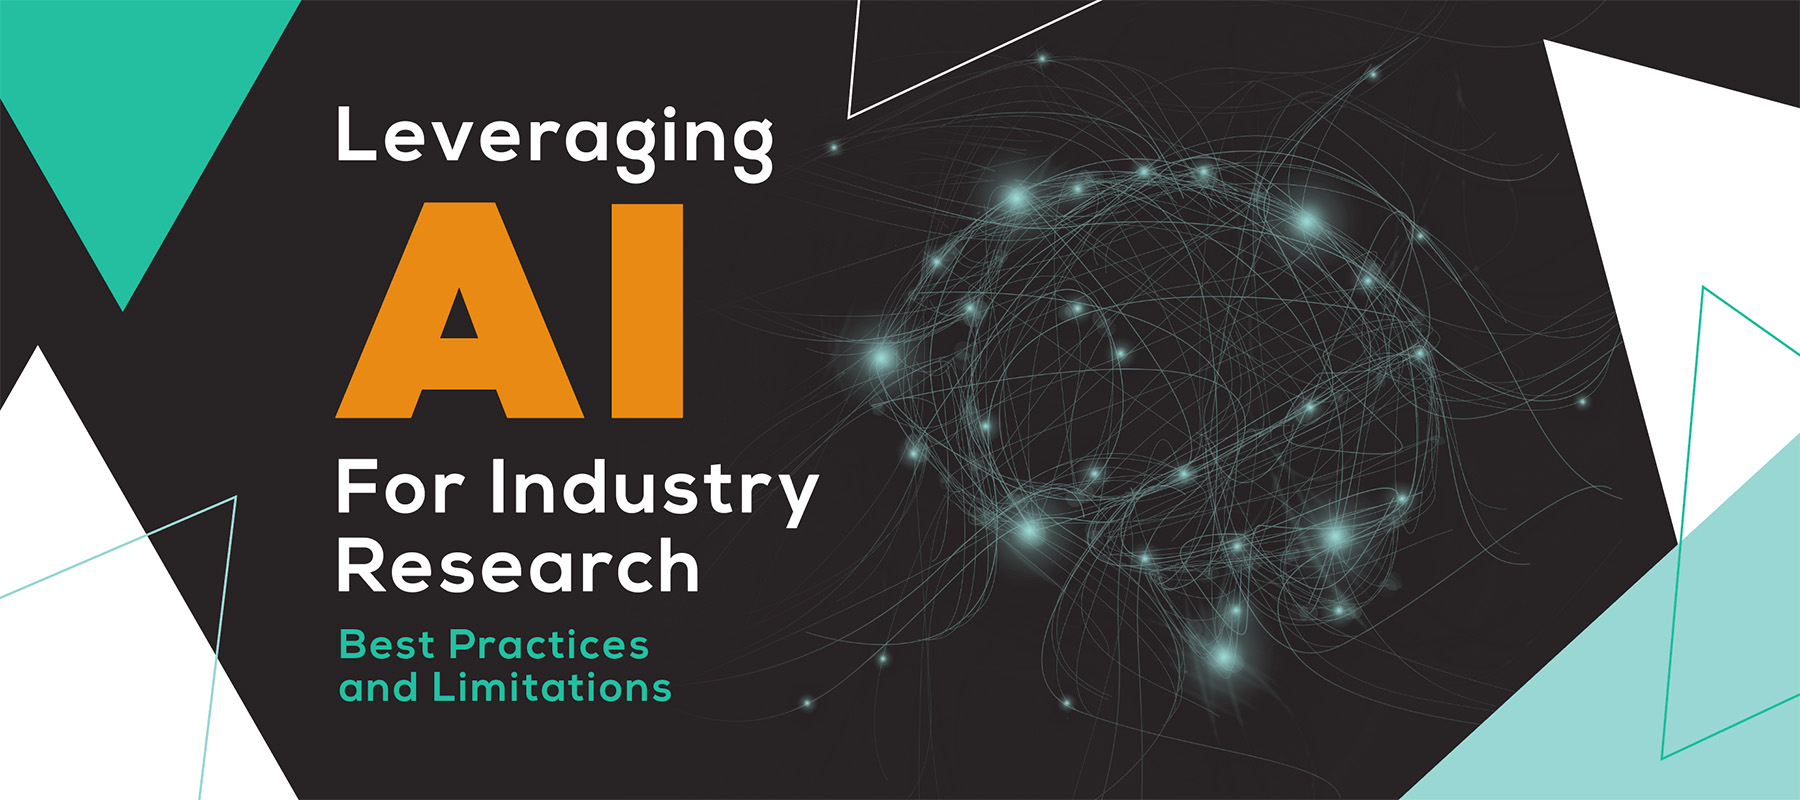 black, orange, and blue graphic banner for blog: "Leveraging AI For Industry Research: Best Practices And Limitations"